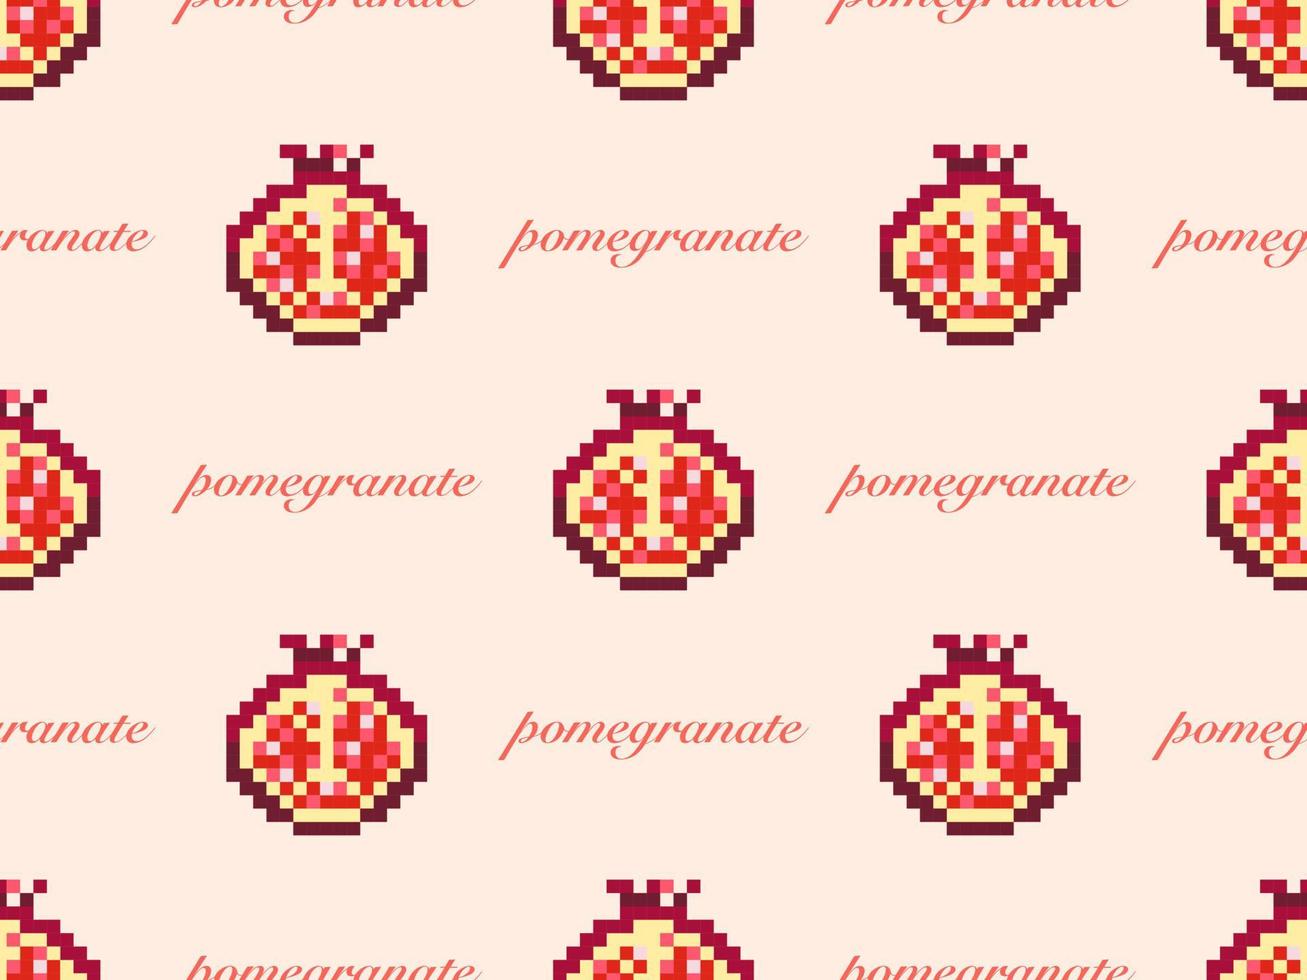 Pomegranate cartoon character seamless pattern on orange background.Pixel style vector